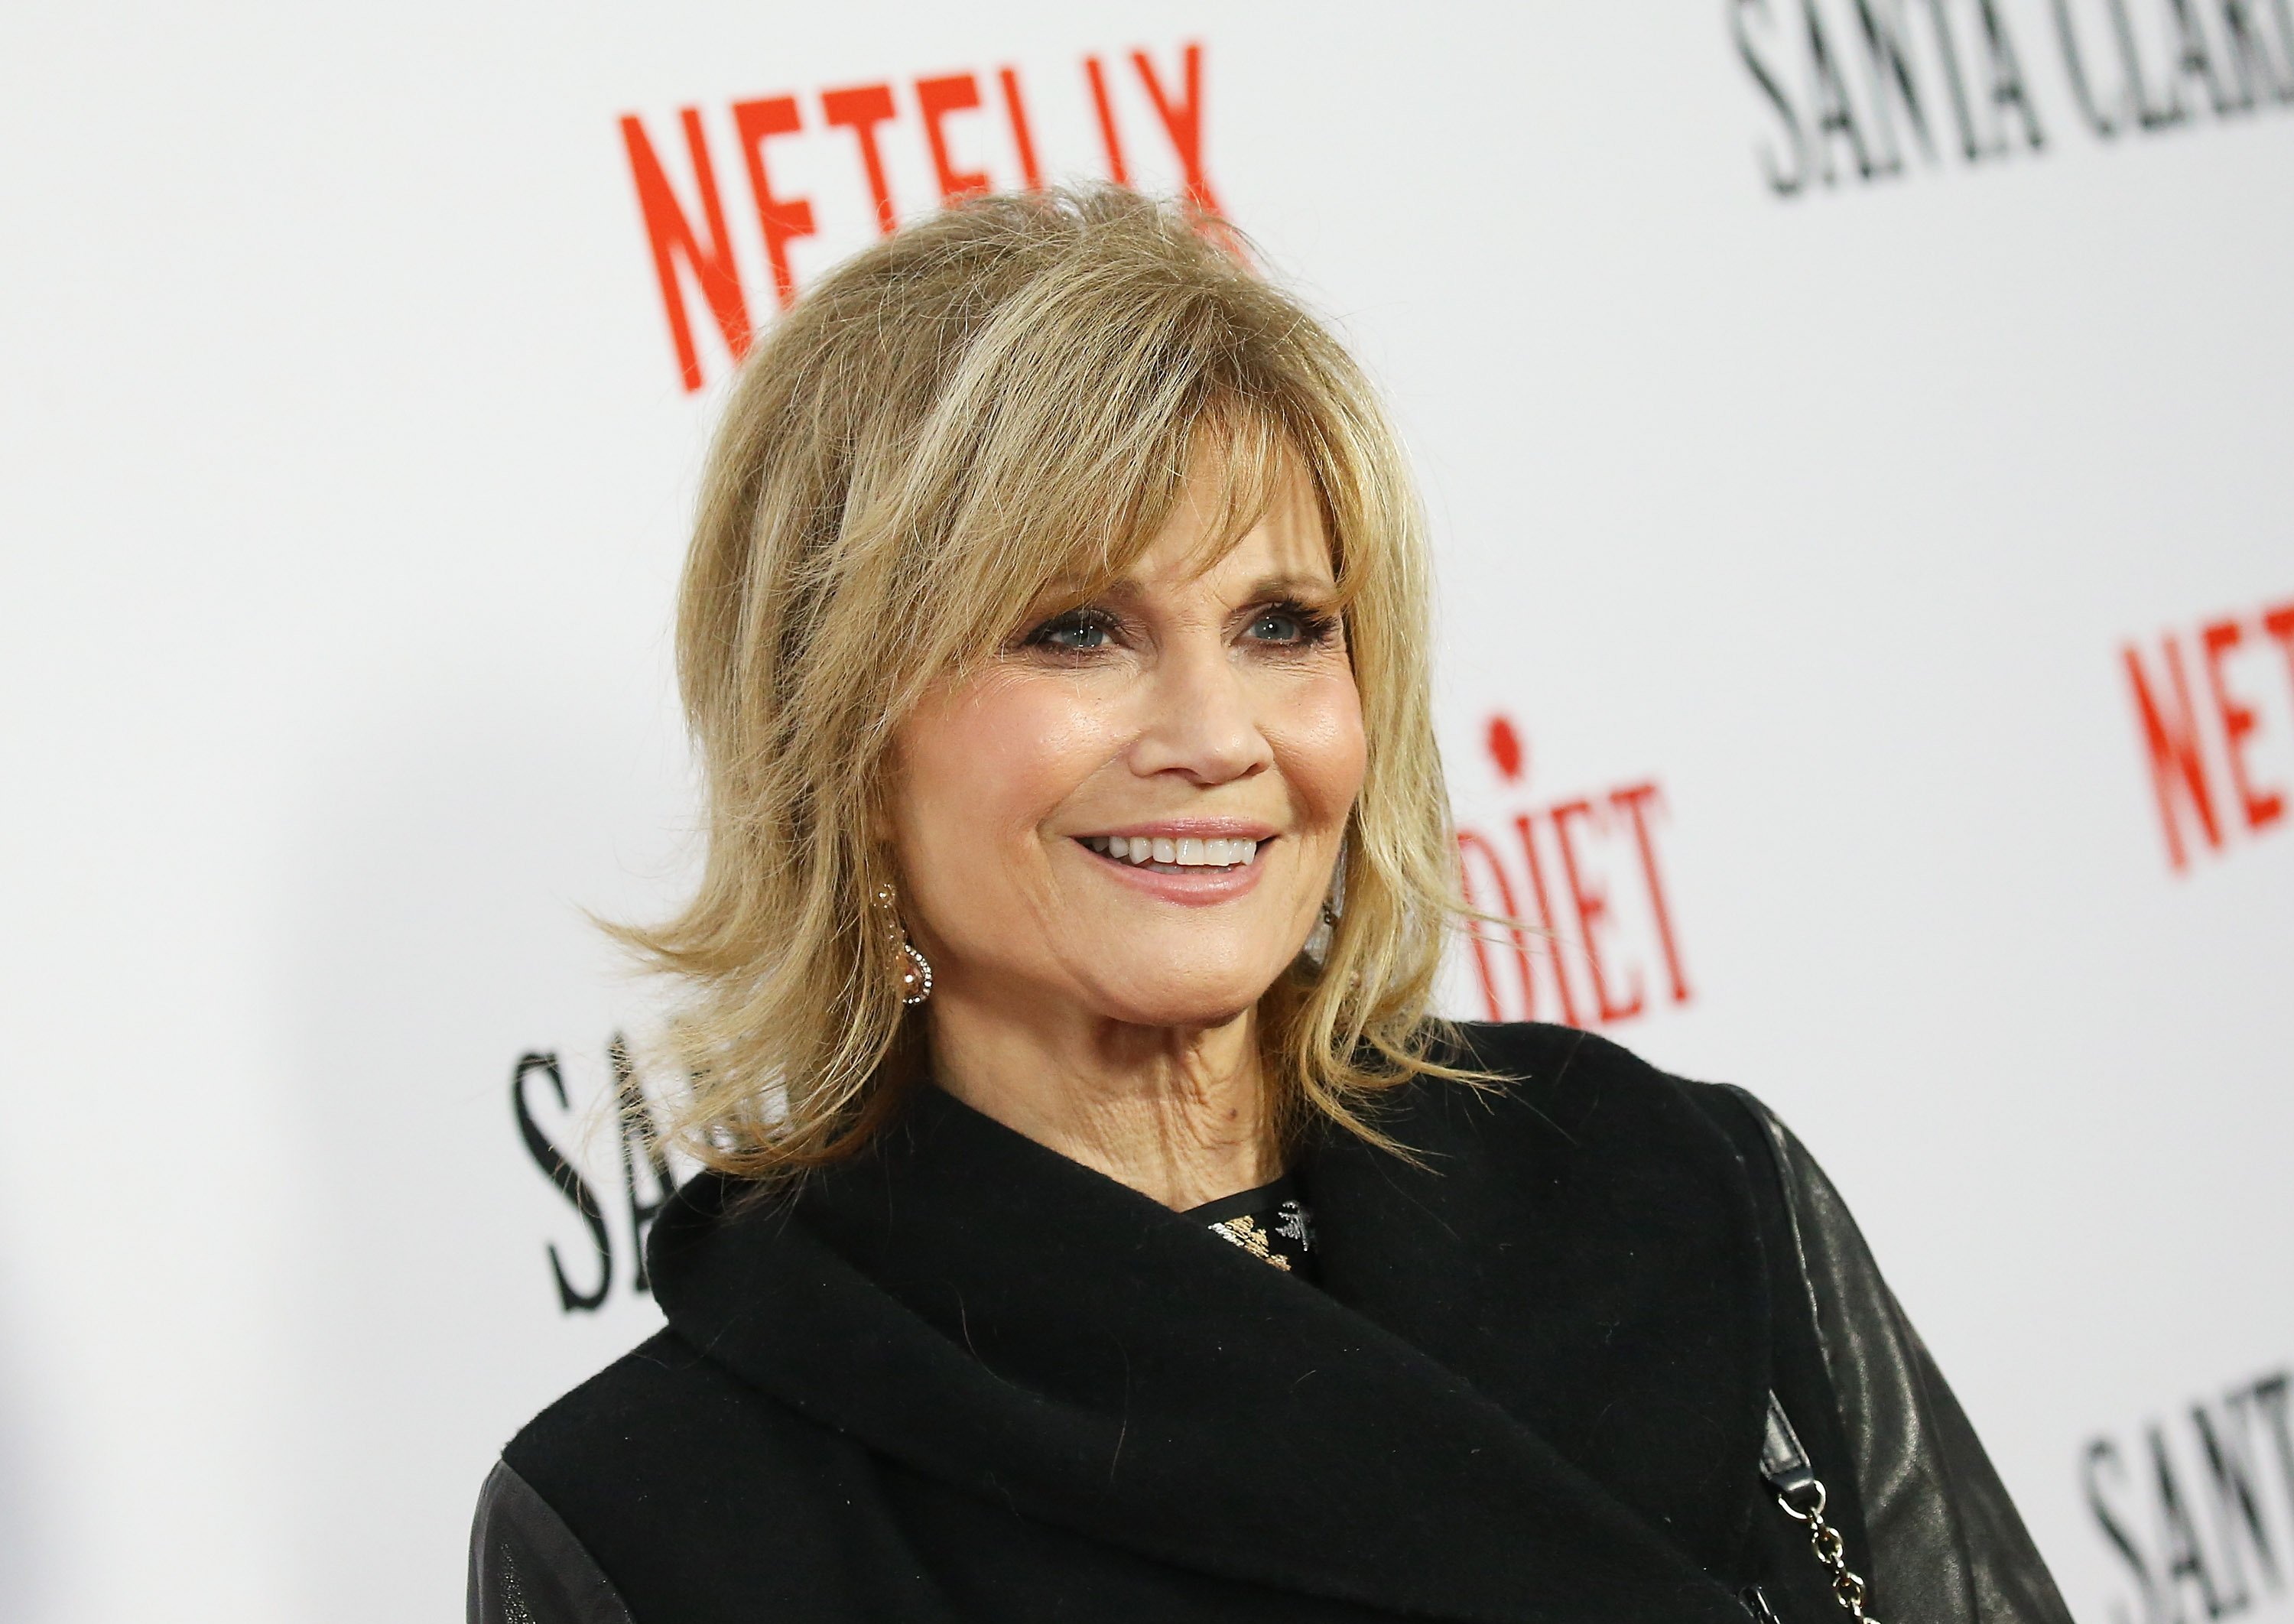  Markie Post attends Netflix's "Santa Clarita Diet" season 2 premiere held at The Dome at Arclight Hollywood on March 22, 2018 